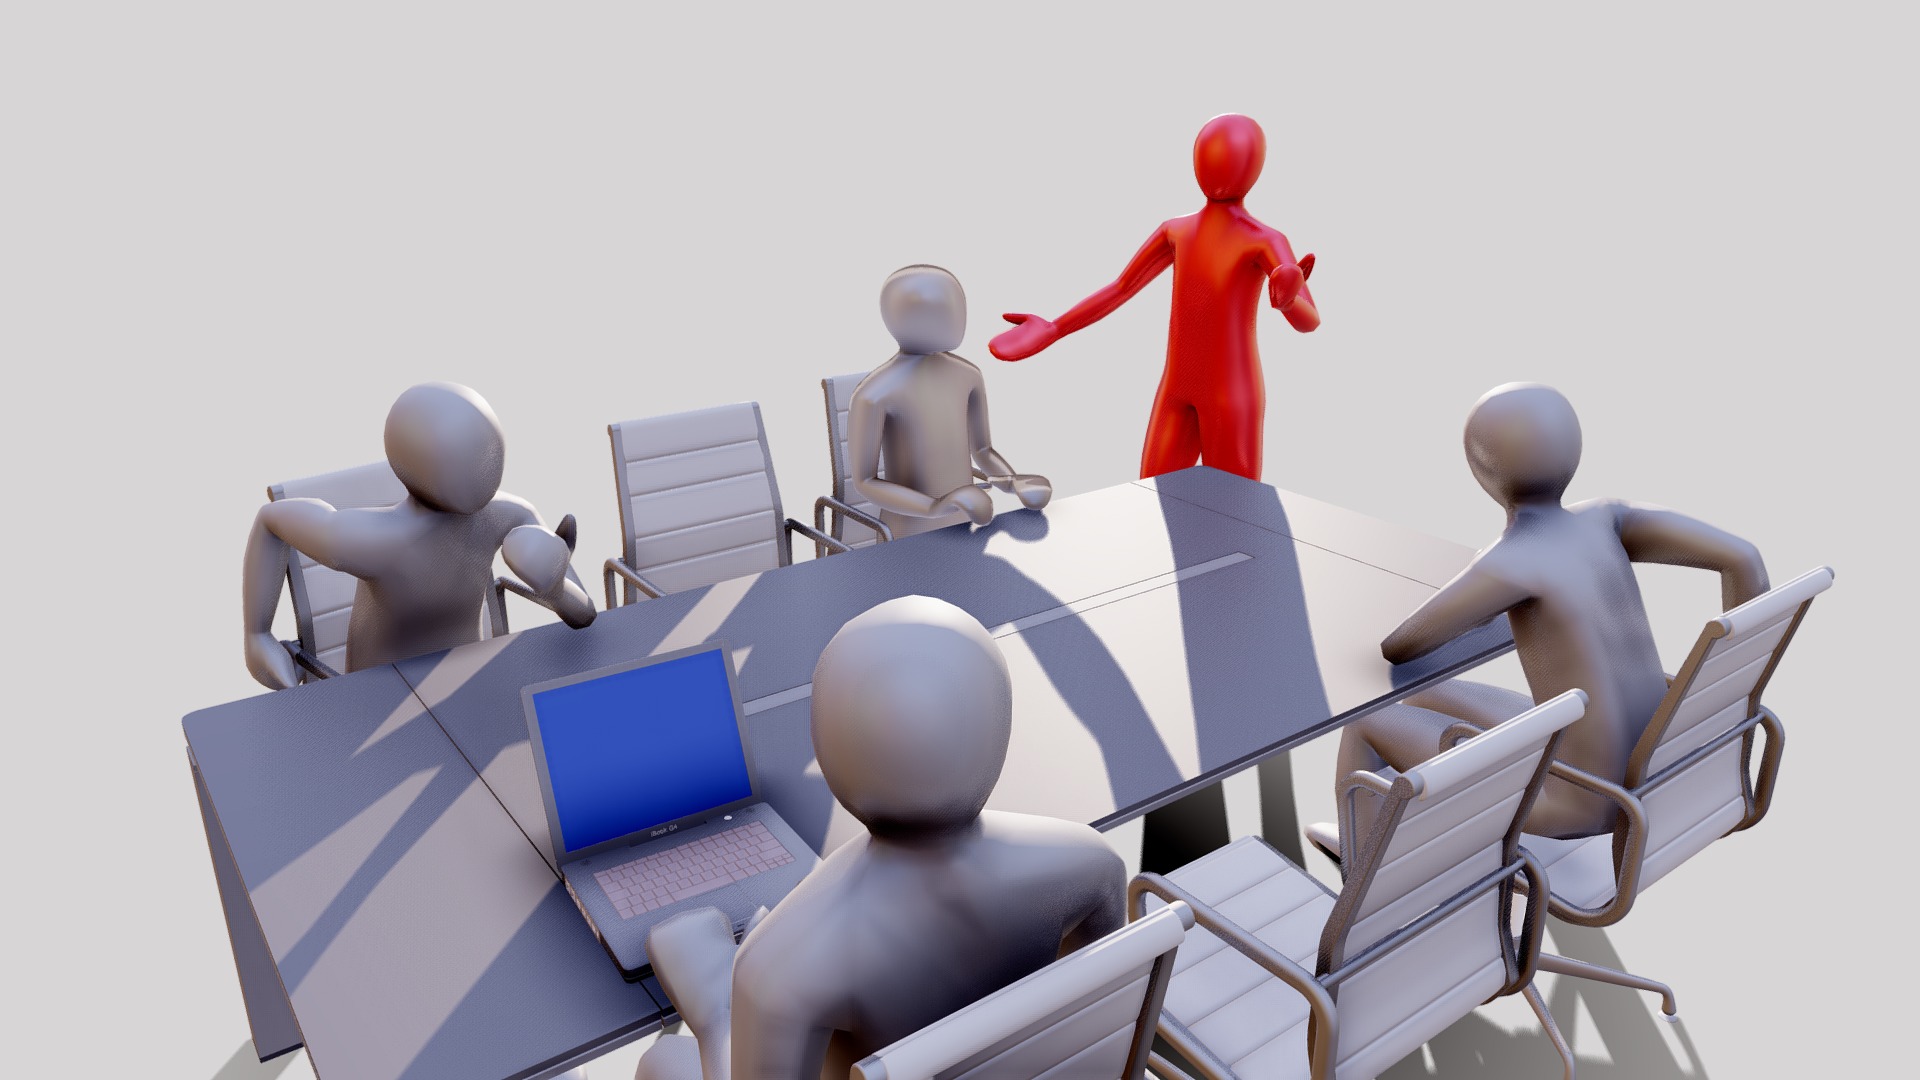 3D model 3D Men Conference - This is a 3D model of the 3D Men Conference. The 3D model is about a group of people around a table.